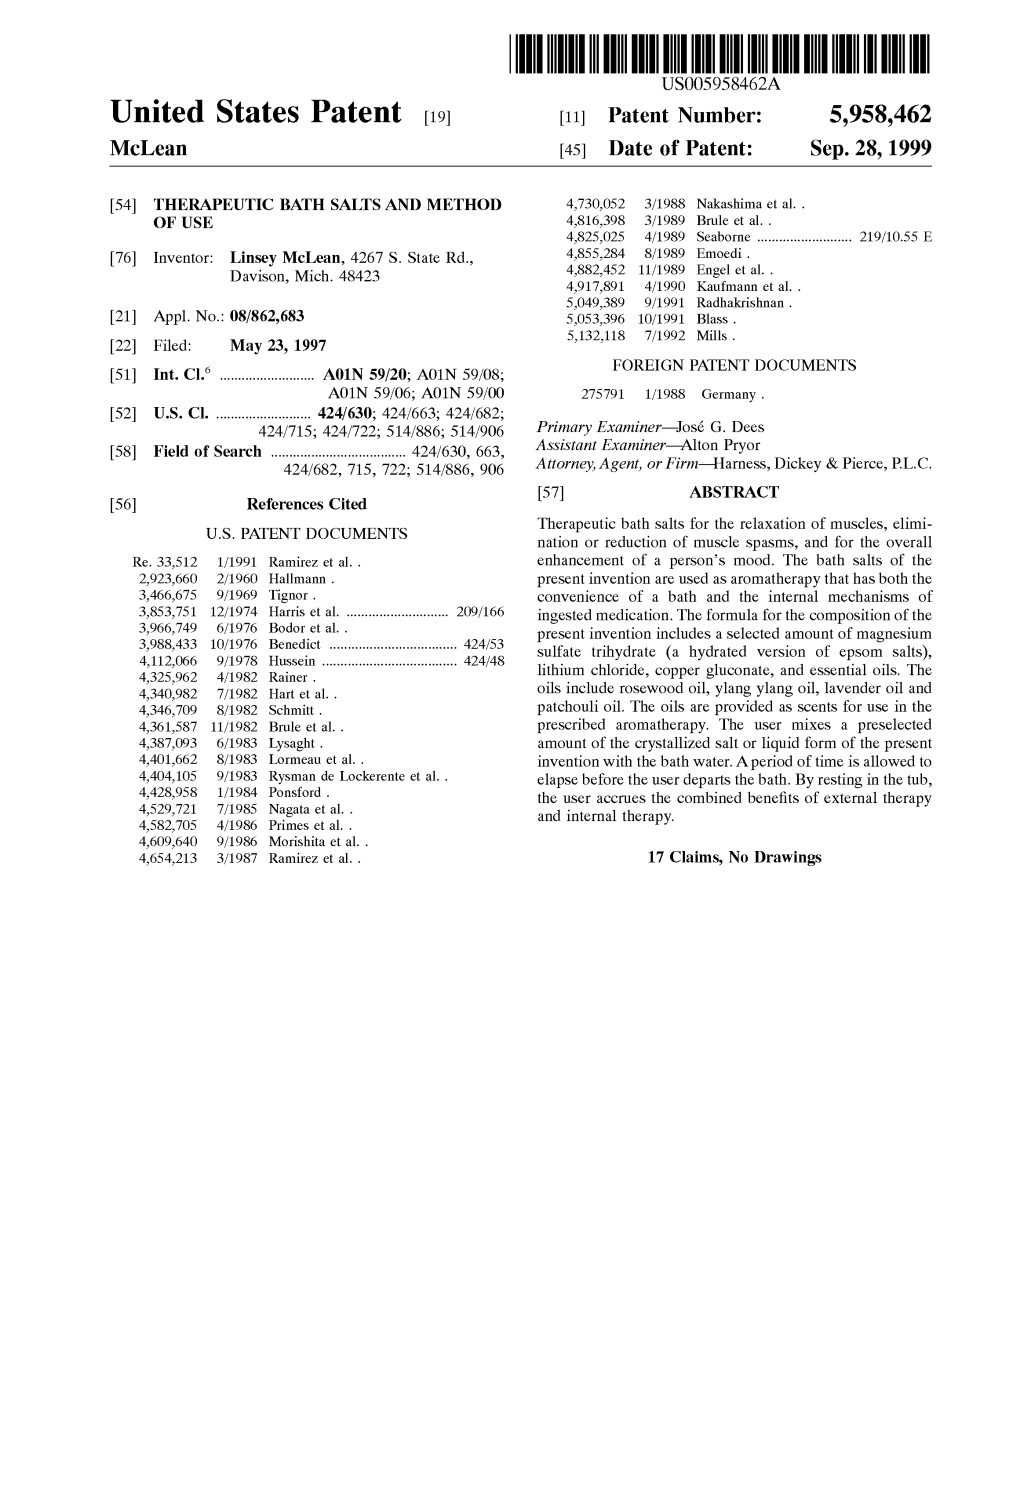 United States Patent (19) 11 Patent Number: 5,958,462 Mclean (45) Date of Patent: Sep